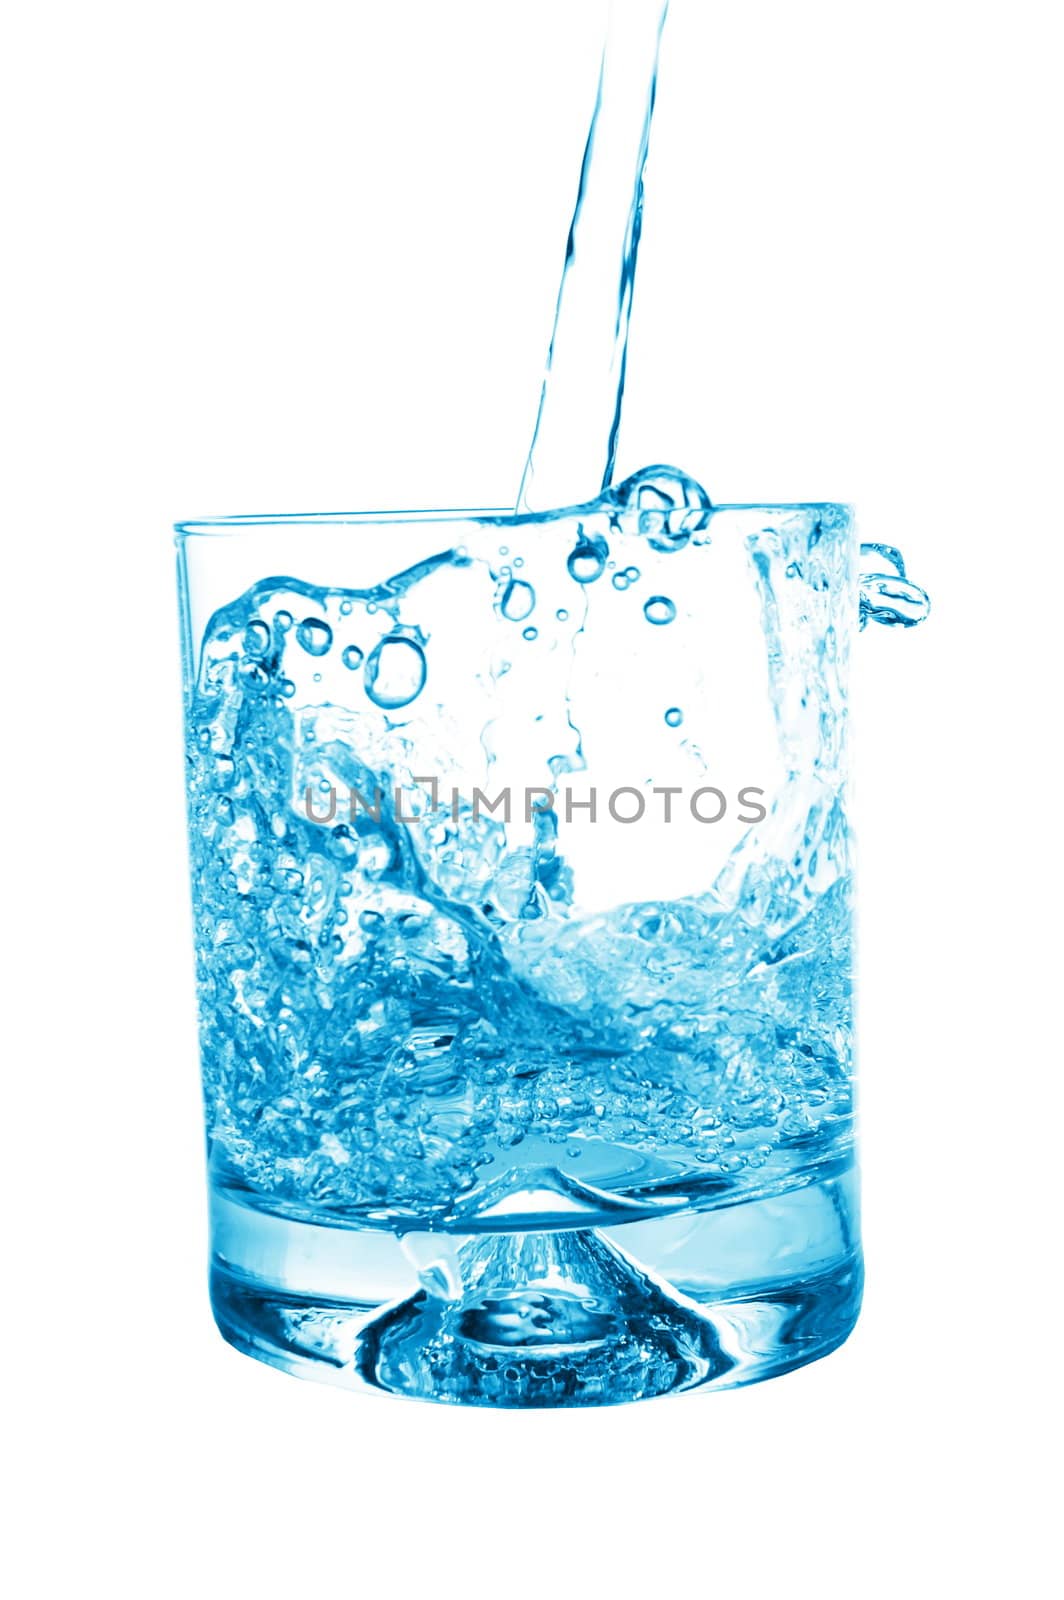 glass of water isolated on white background